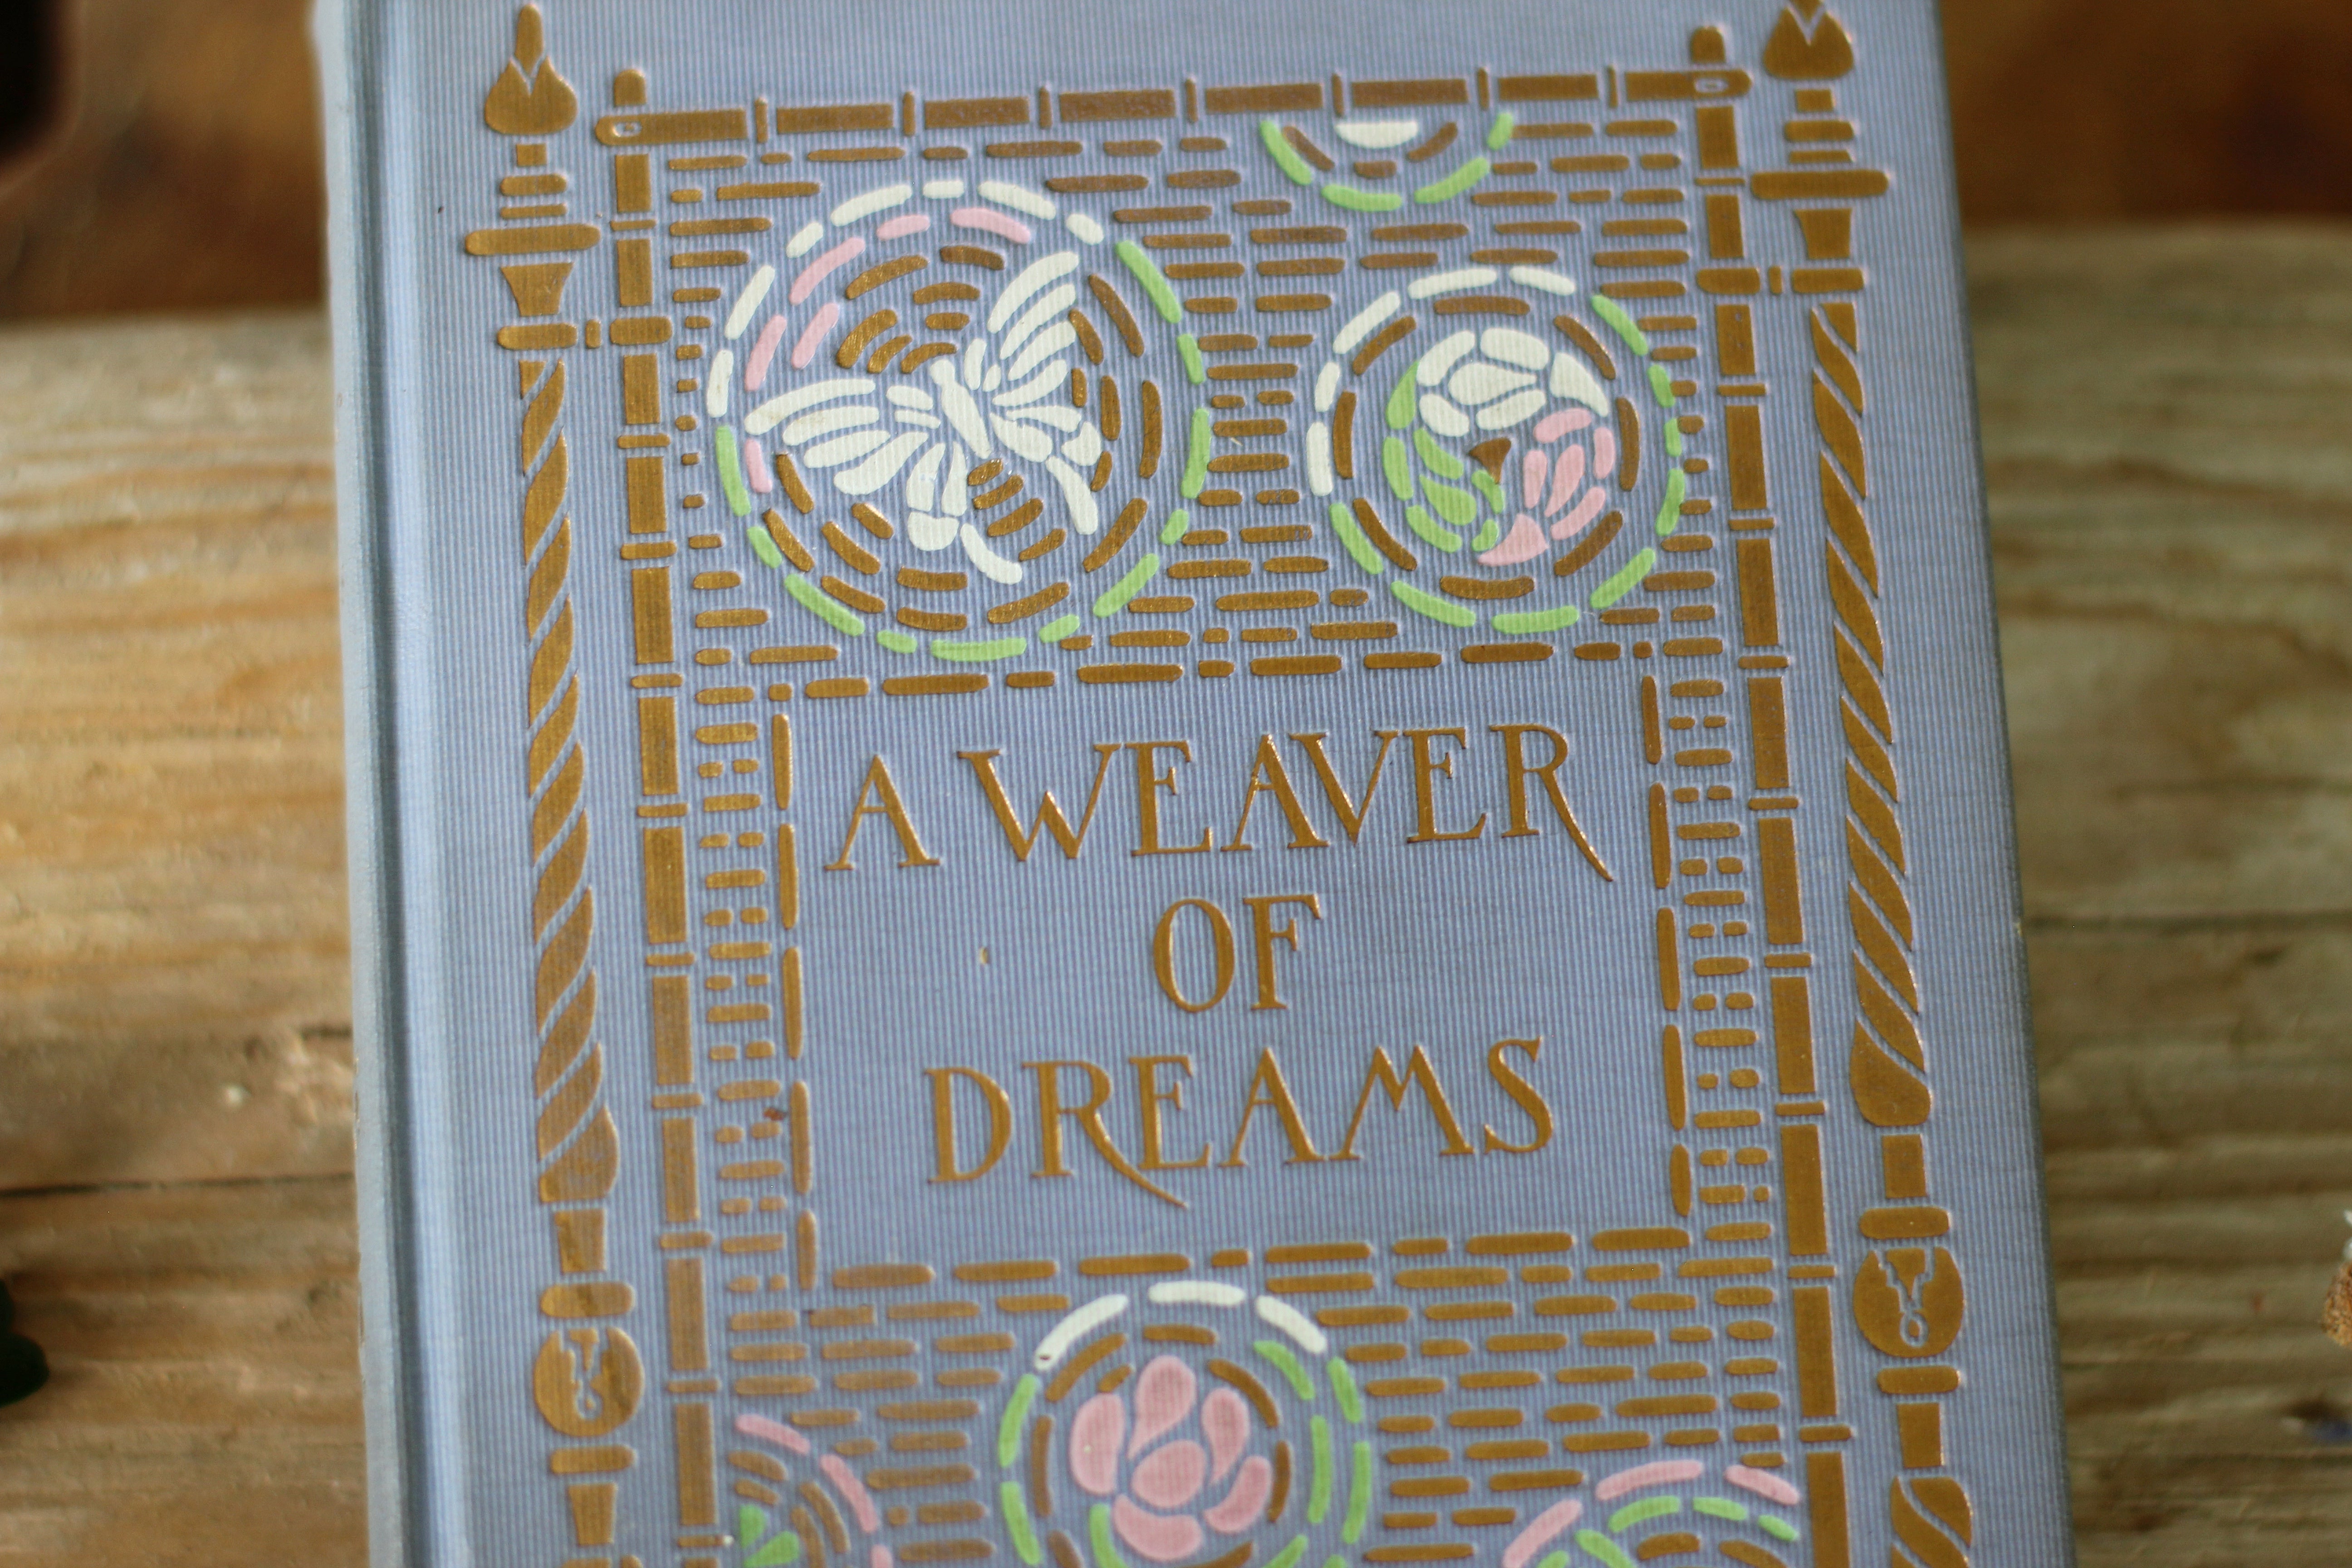 Antique Book A Weaver of Dreams by Myrtle Reed 1911 Hardback.